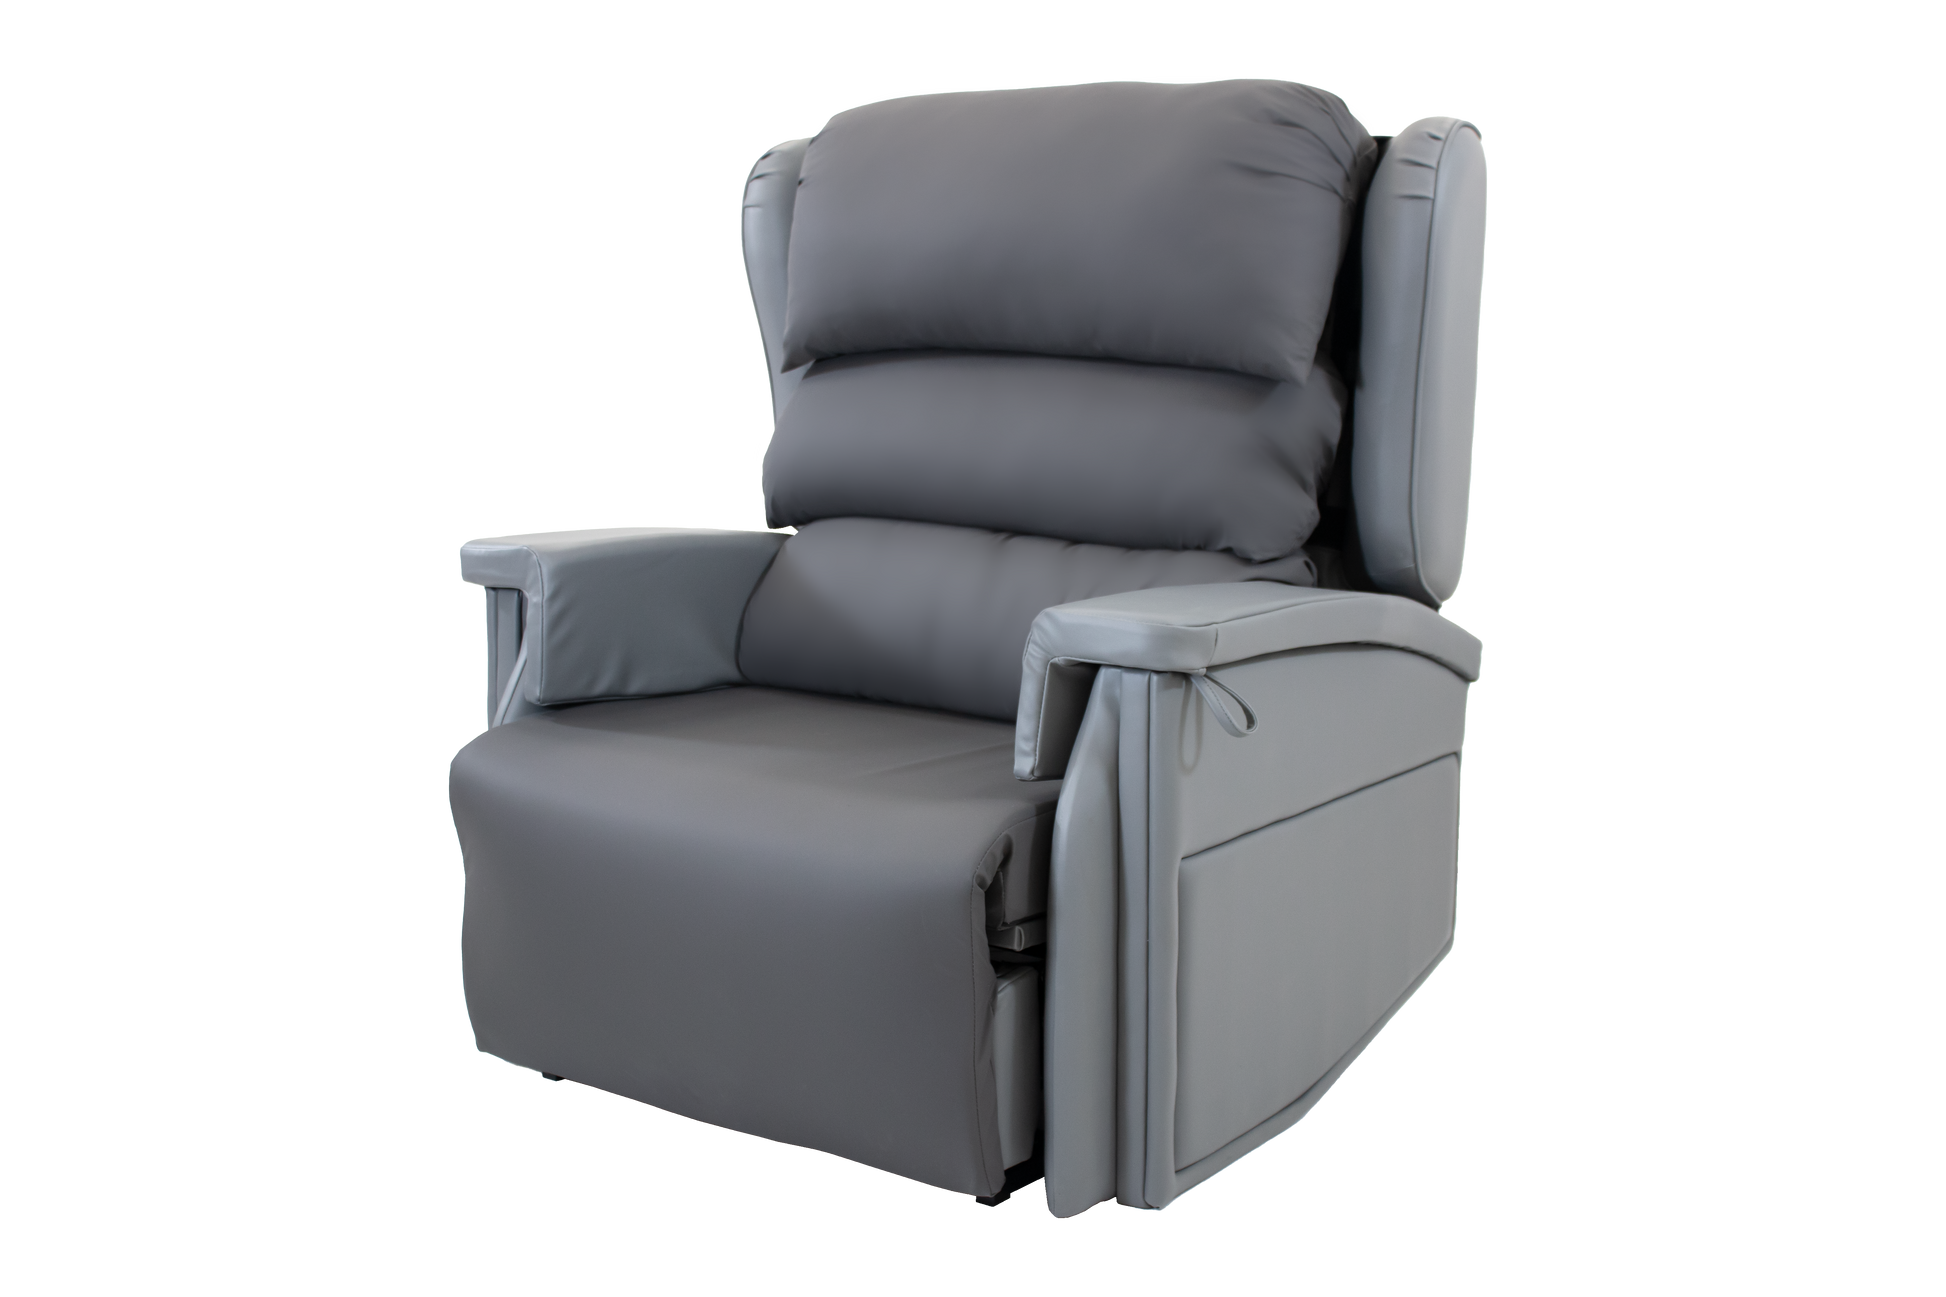 Configura Comfort Bariatric Tilt in Space Recliner/Lift Chair - 254kg 16" Seat Height with 24" Seat Width